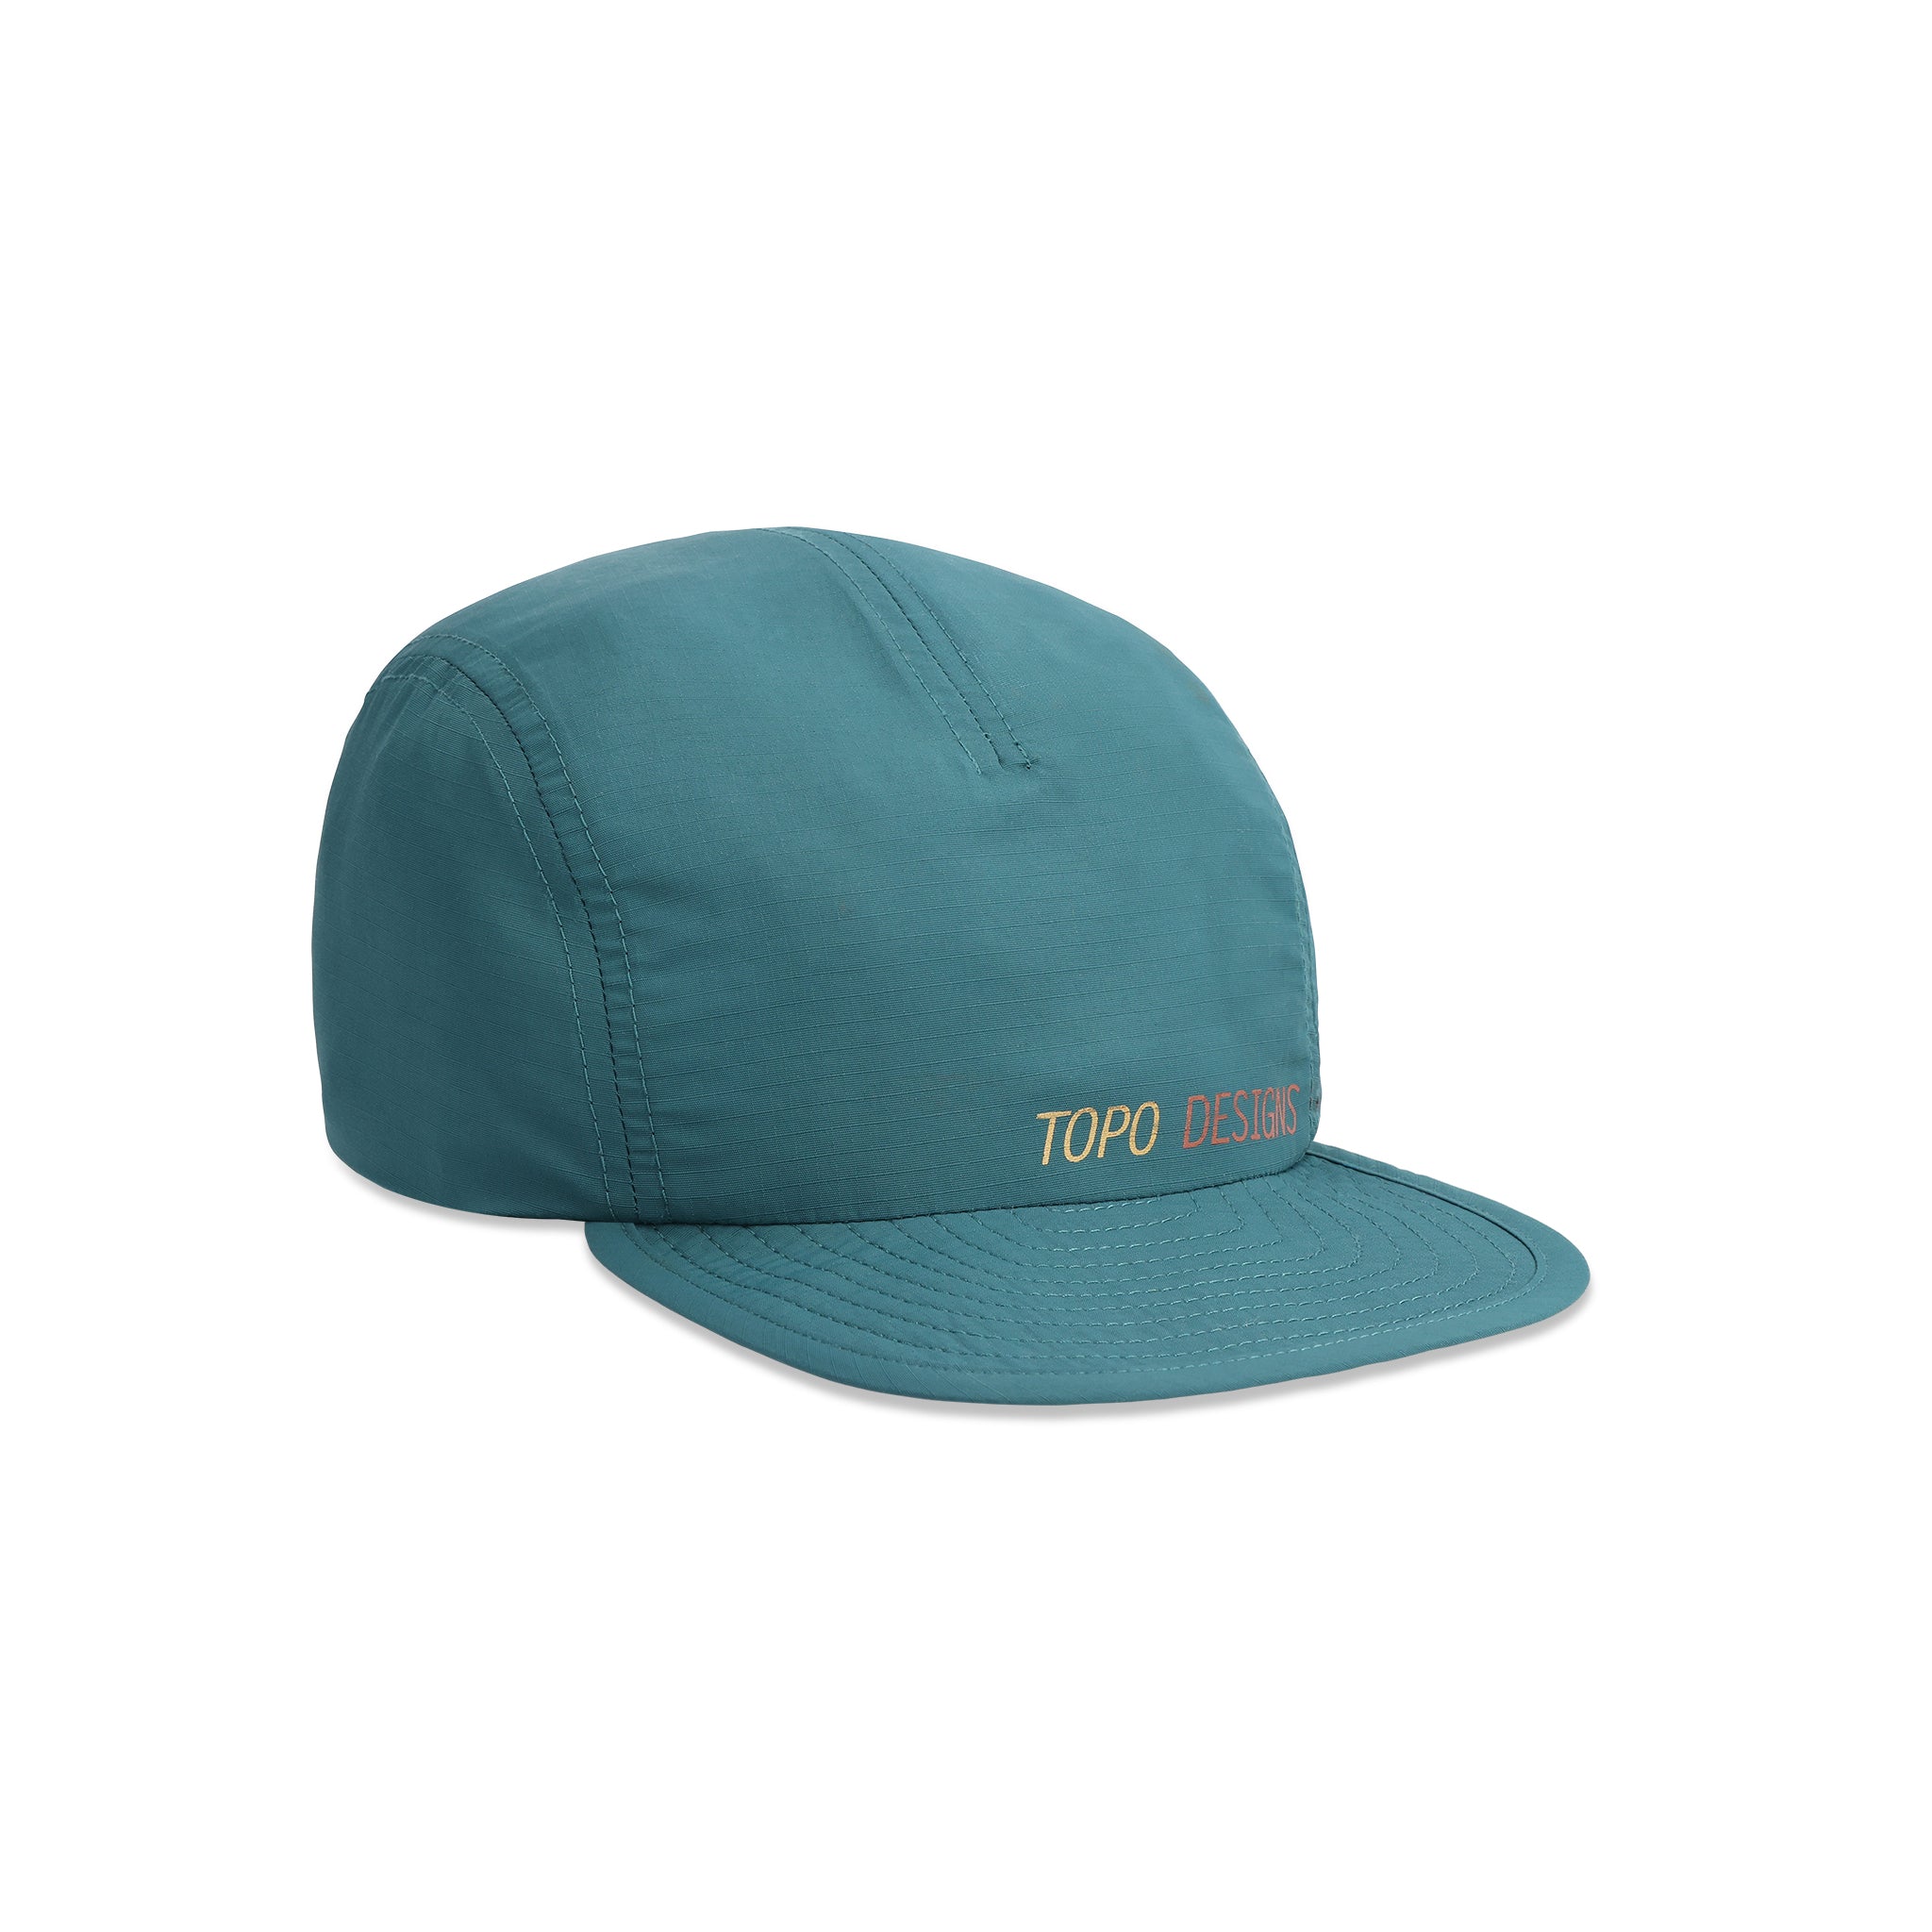 Front View of Topo Designs Global Packable Hat in "Pond Blue"